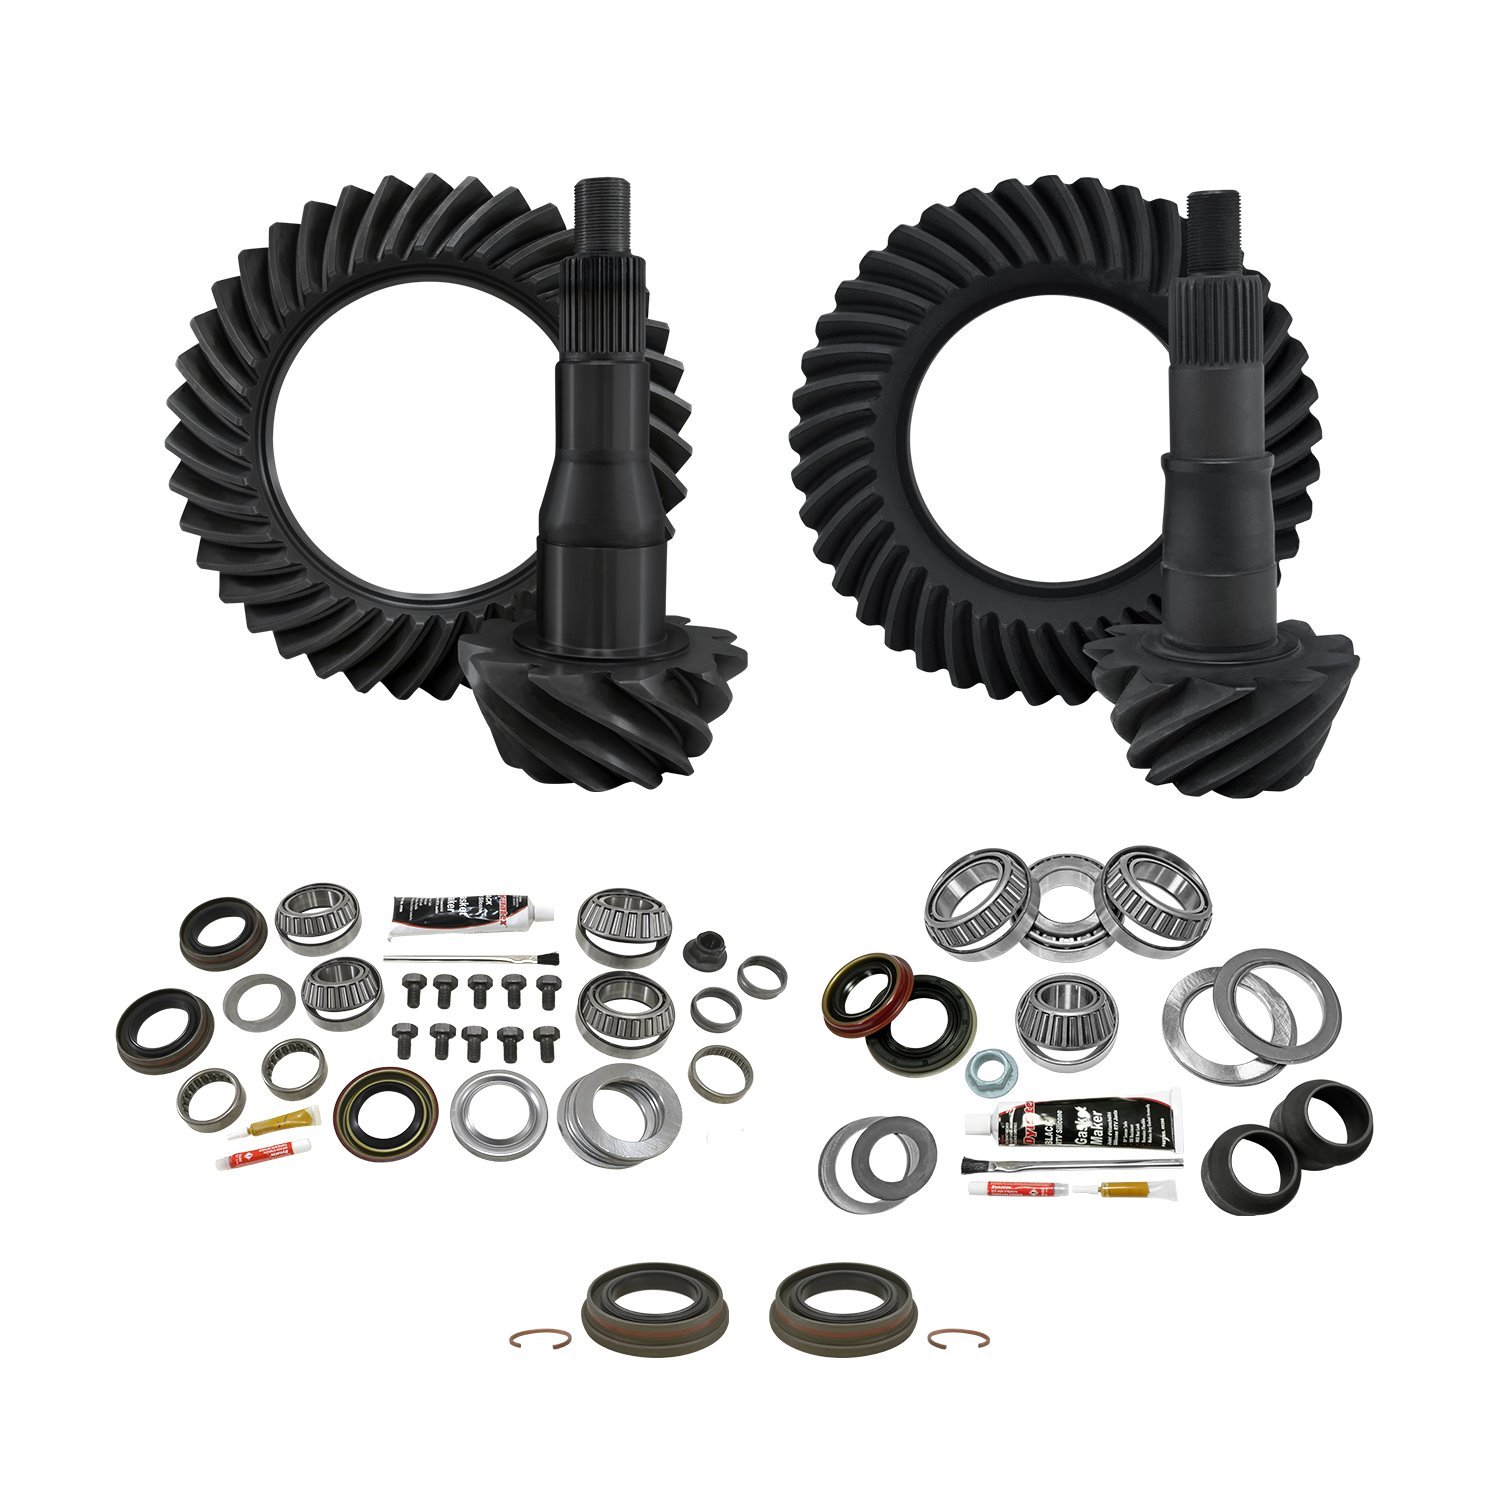 Re-Gear & Installation Kit, Ford 9.75 in., 2000-2010 F150, 5.13 Ratio, Fr&Rr